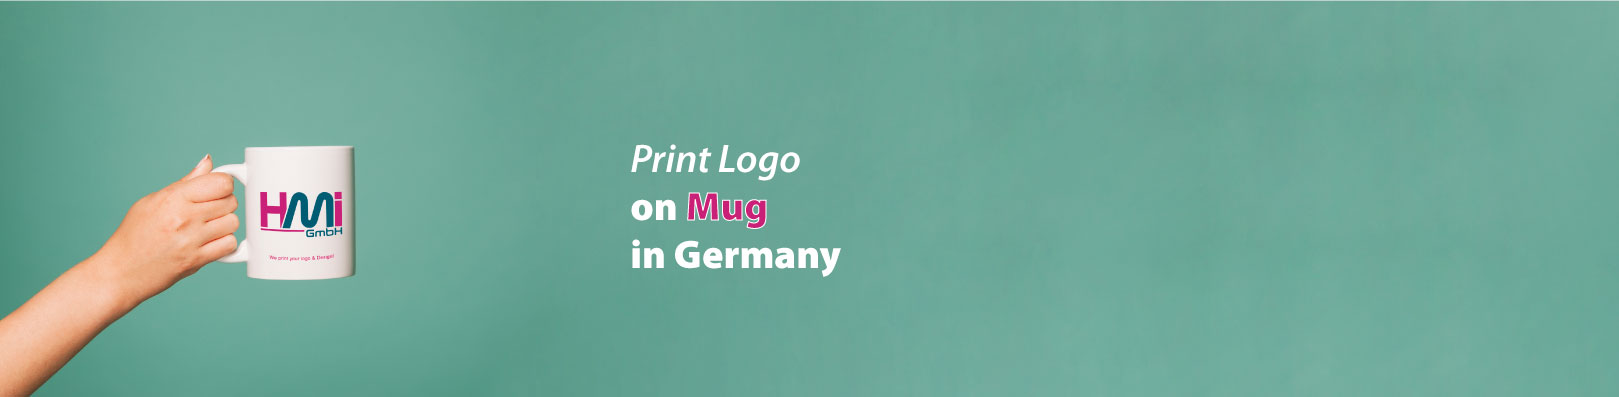 Print Logo on Mug | Print your logo on promotional ceramic mug in Germany | We offer you the best prices for promotional gift items | HMI marketing agency in Germany